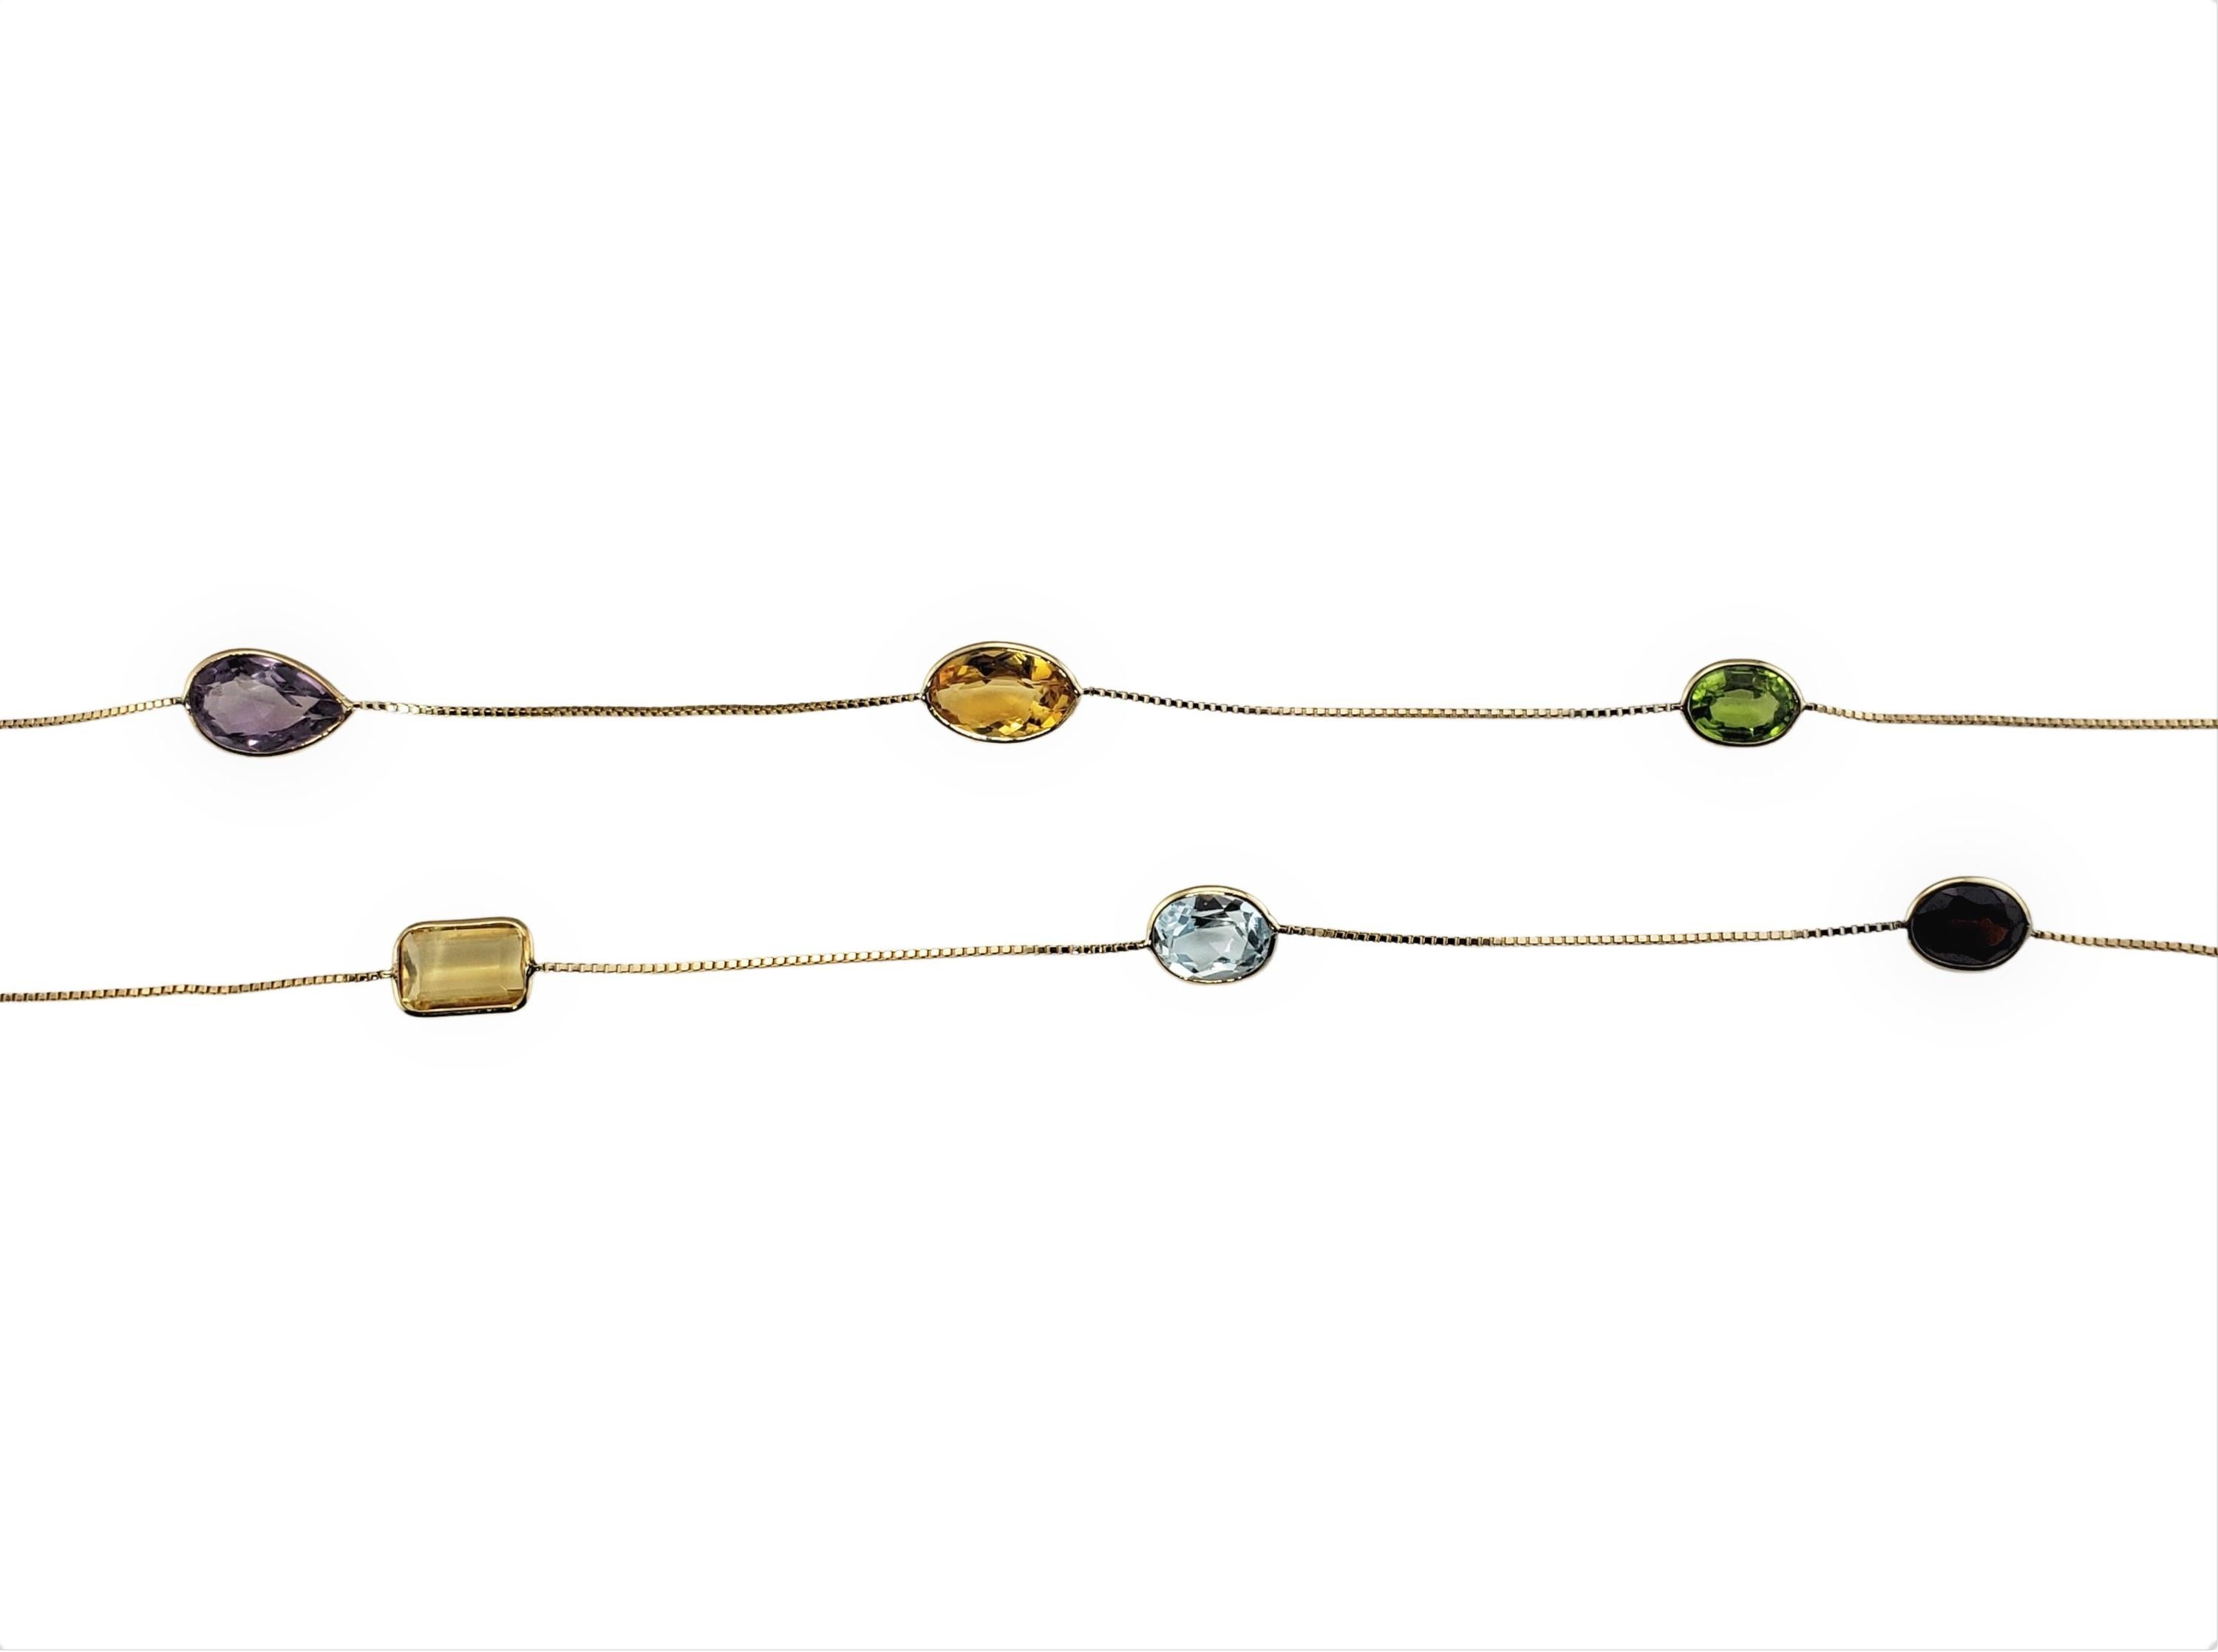 Vintage 14 Karat Yellow Gold Multi Gemstone Necklace-

This lovely necklace features assorted semi-precious stones set in a classic 14K yellow gold necklace.  

Center smoky quartz stone measures approx. 25 mm x 19 mm.  

Size: 36 inches - opera